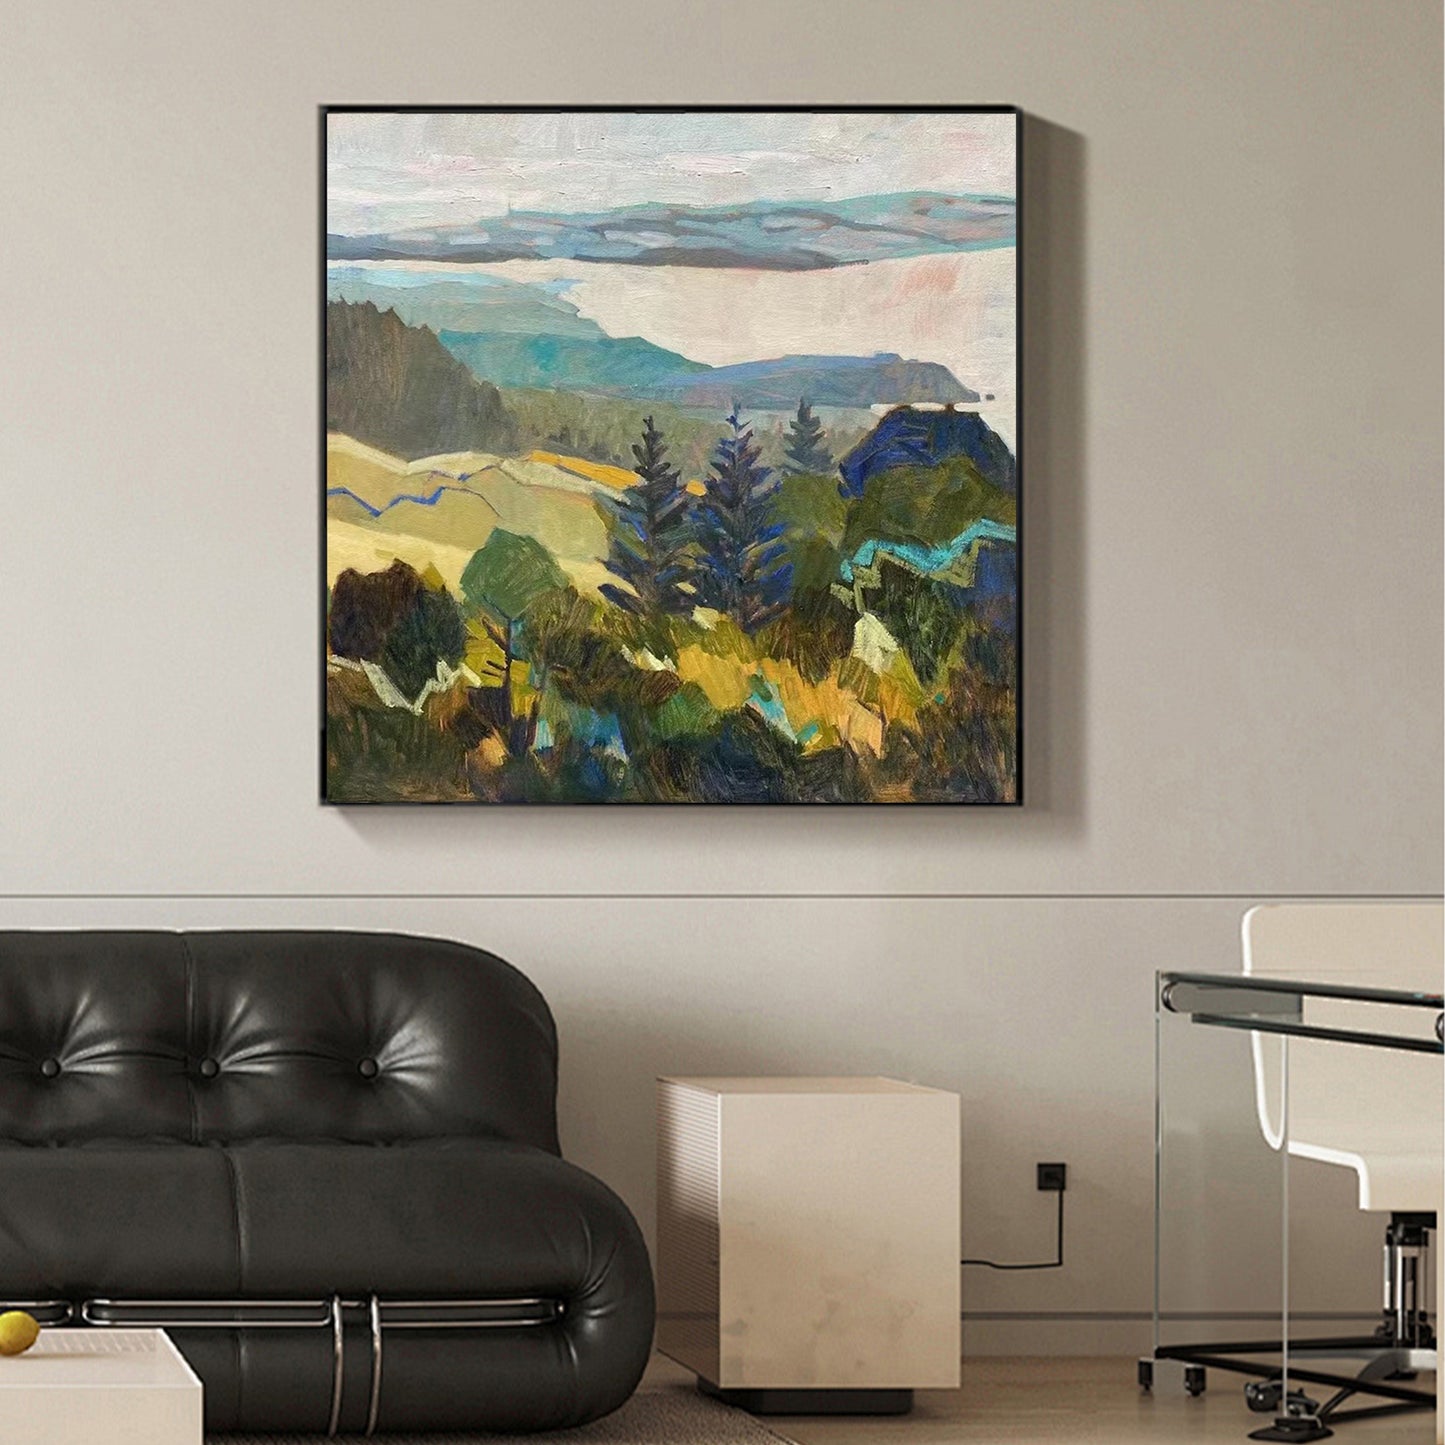 LANDSCAPE PAINTING, AN IMMENSE FOREAST, HAND-PAINTED CANVAS